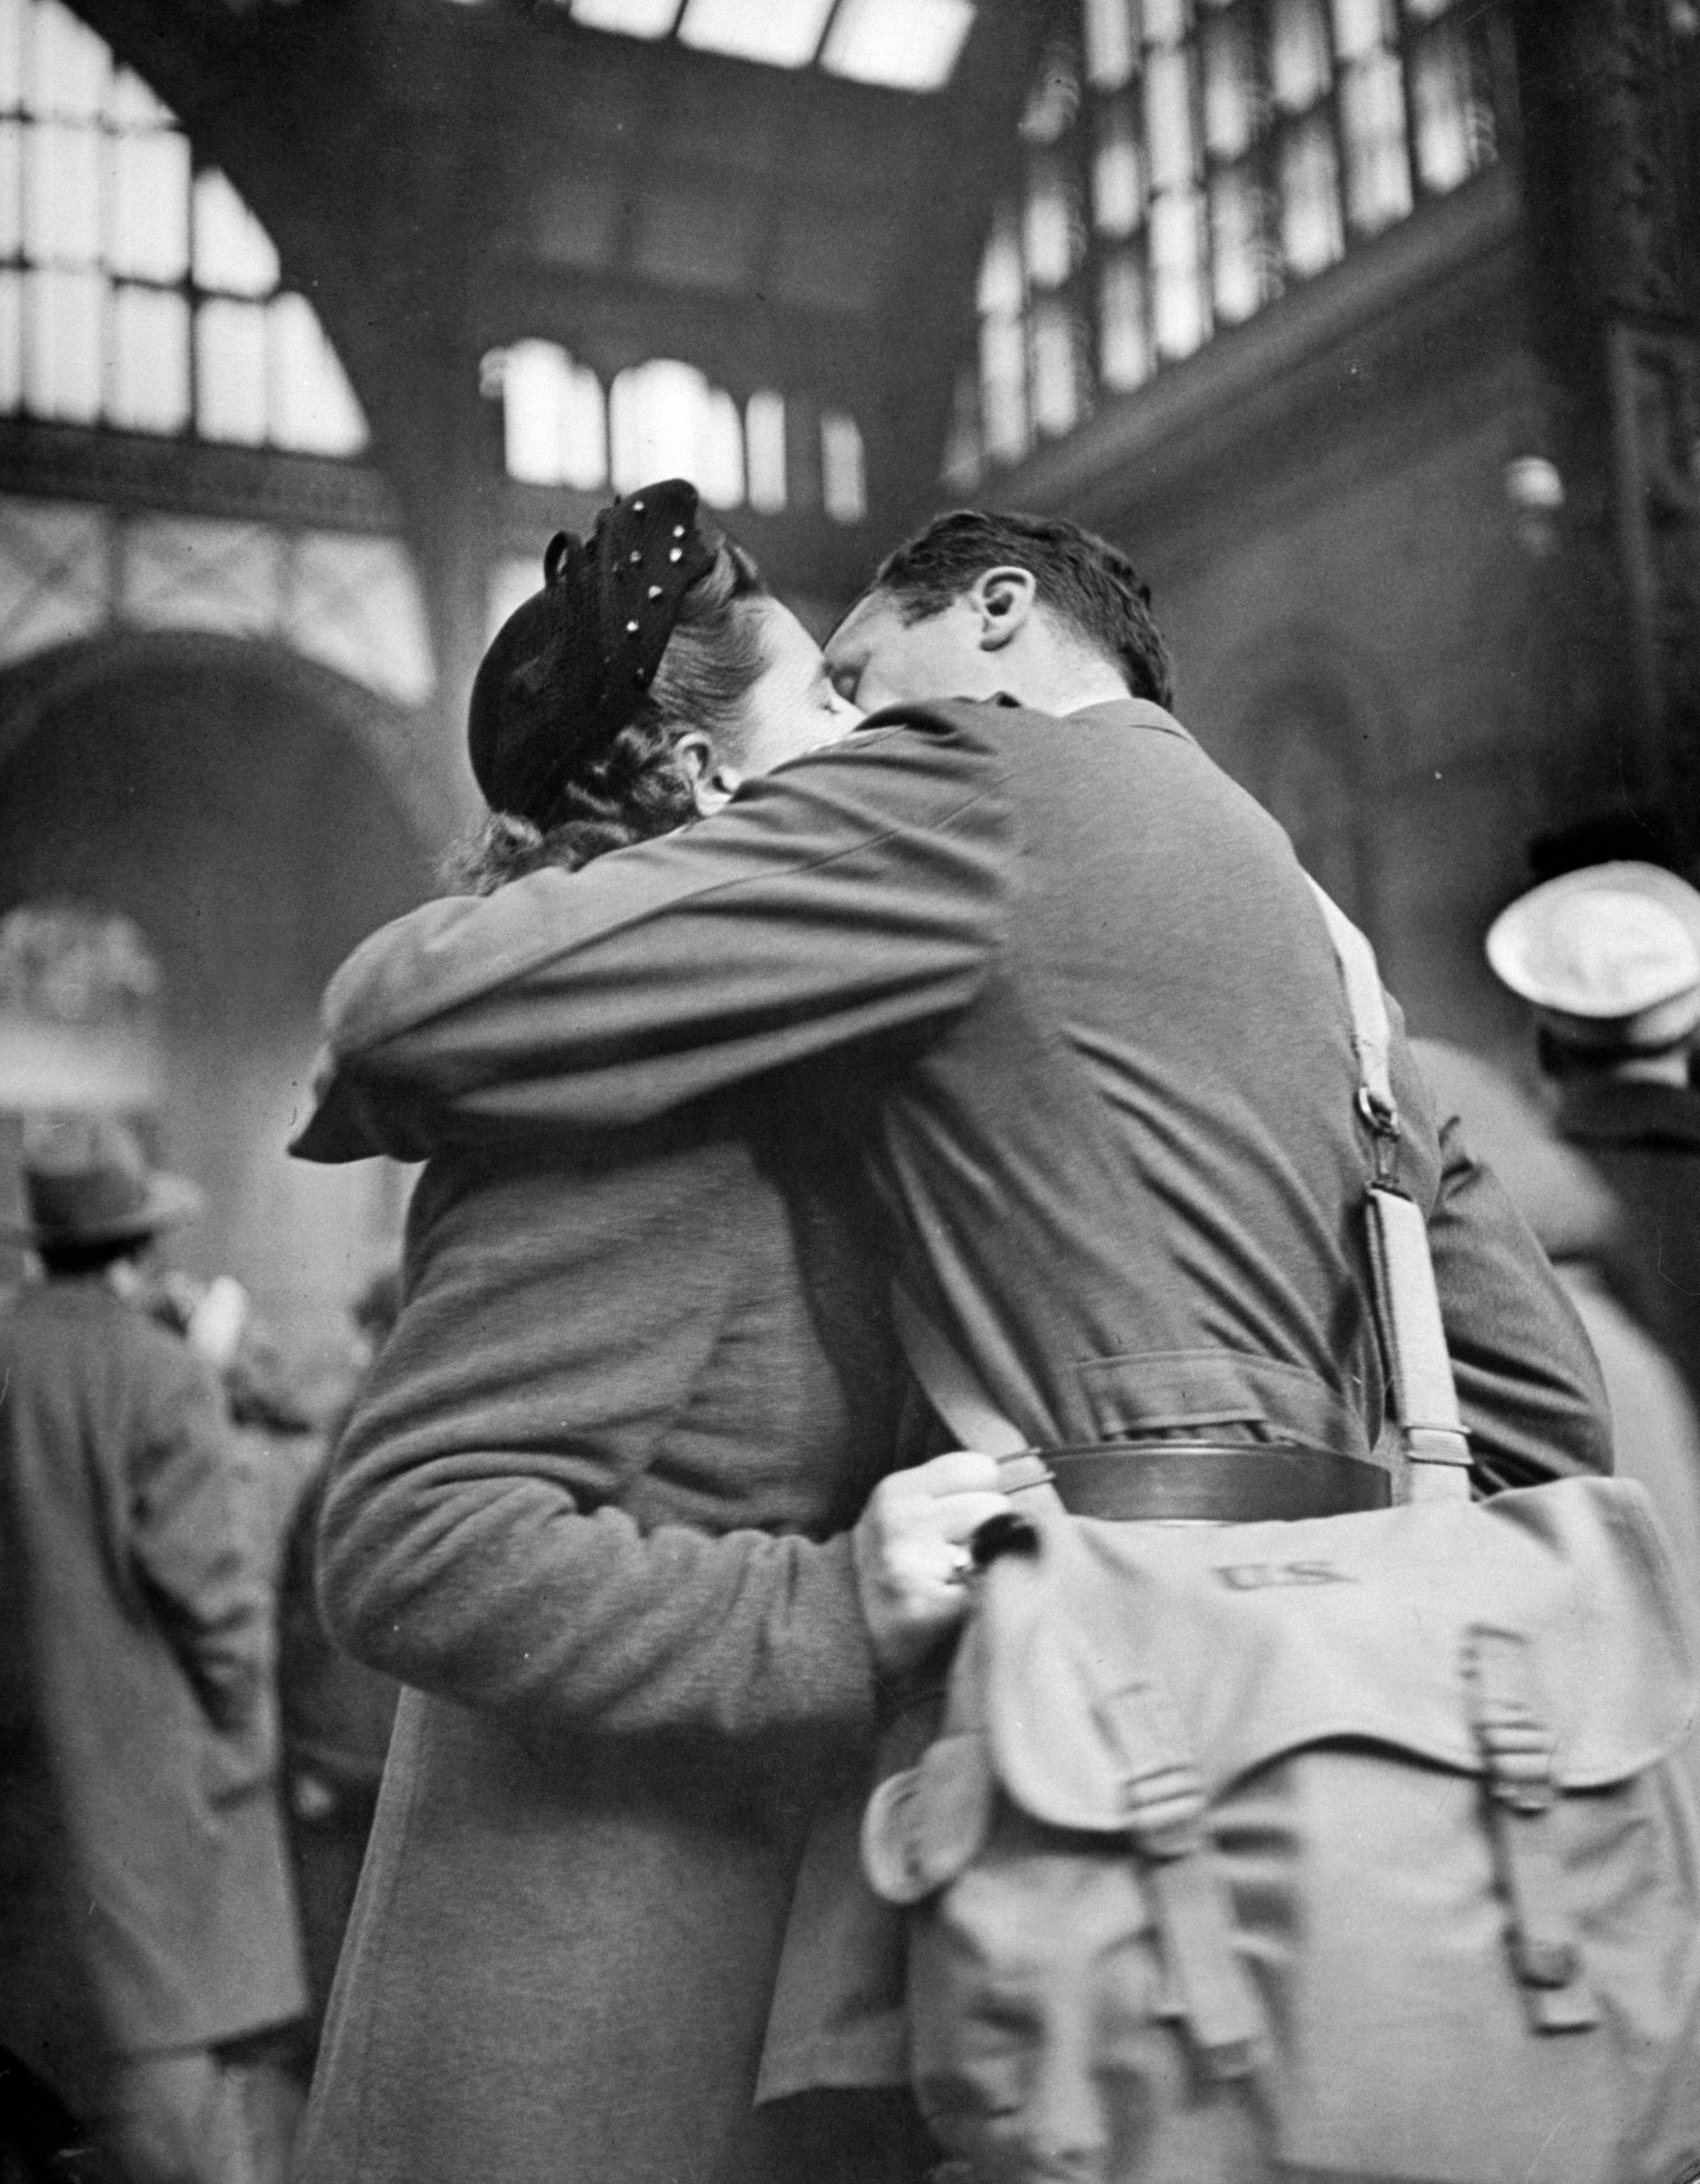 Soldier giving his girlfriend a smothering kiss goodbye at Pennsylvania Station before returning to duty after brief furlough.